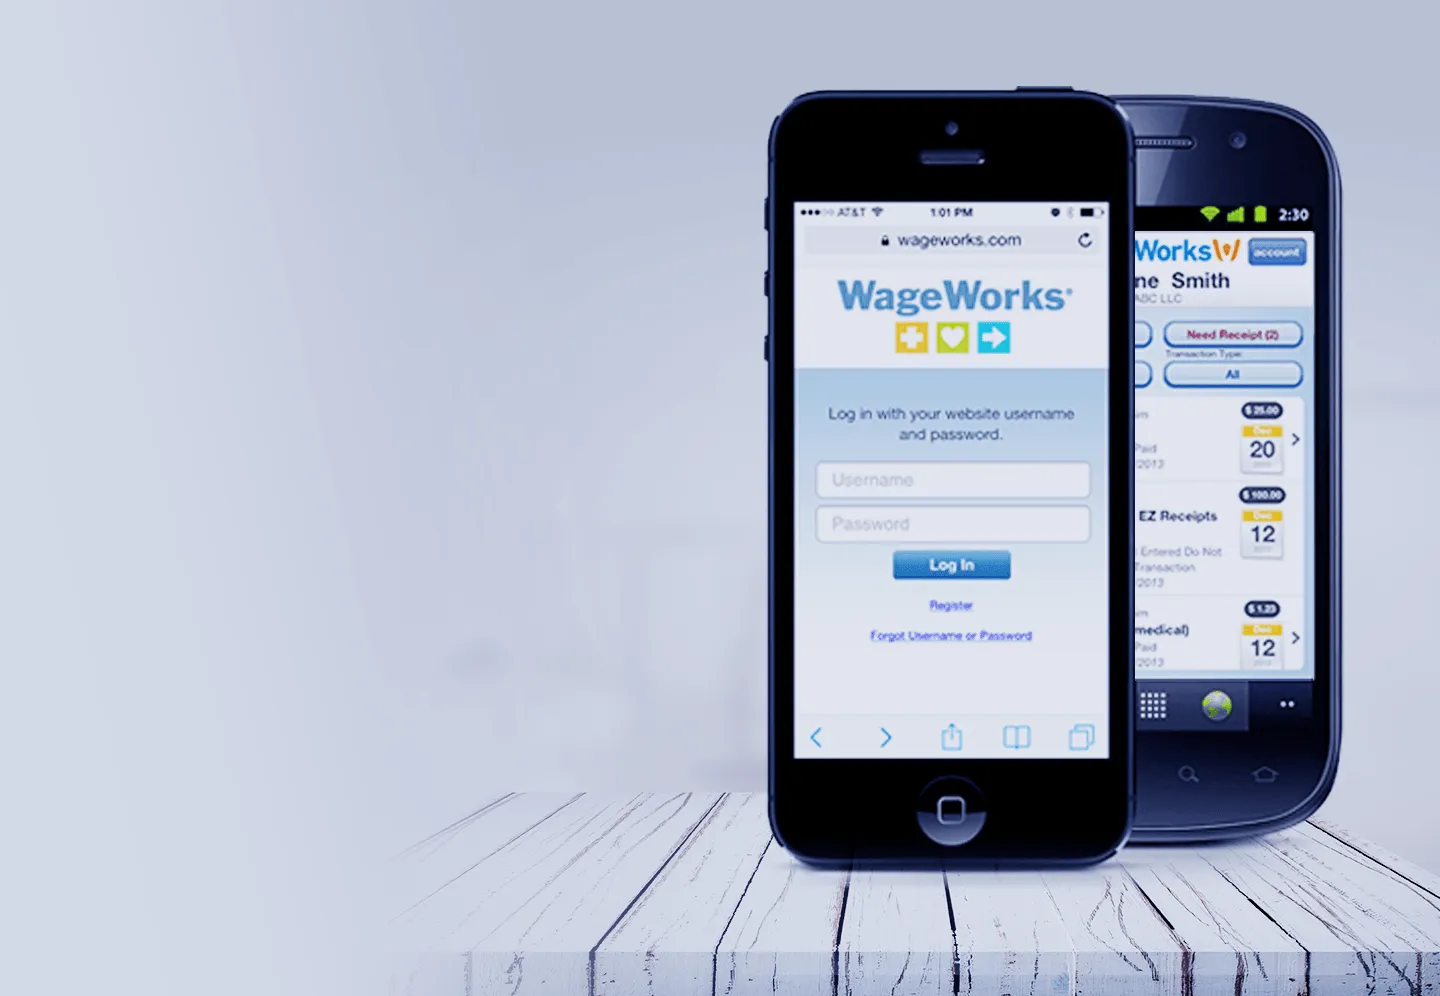 WageWorks: Mobile Applications for HR Management background